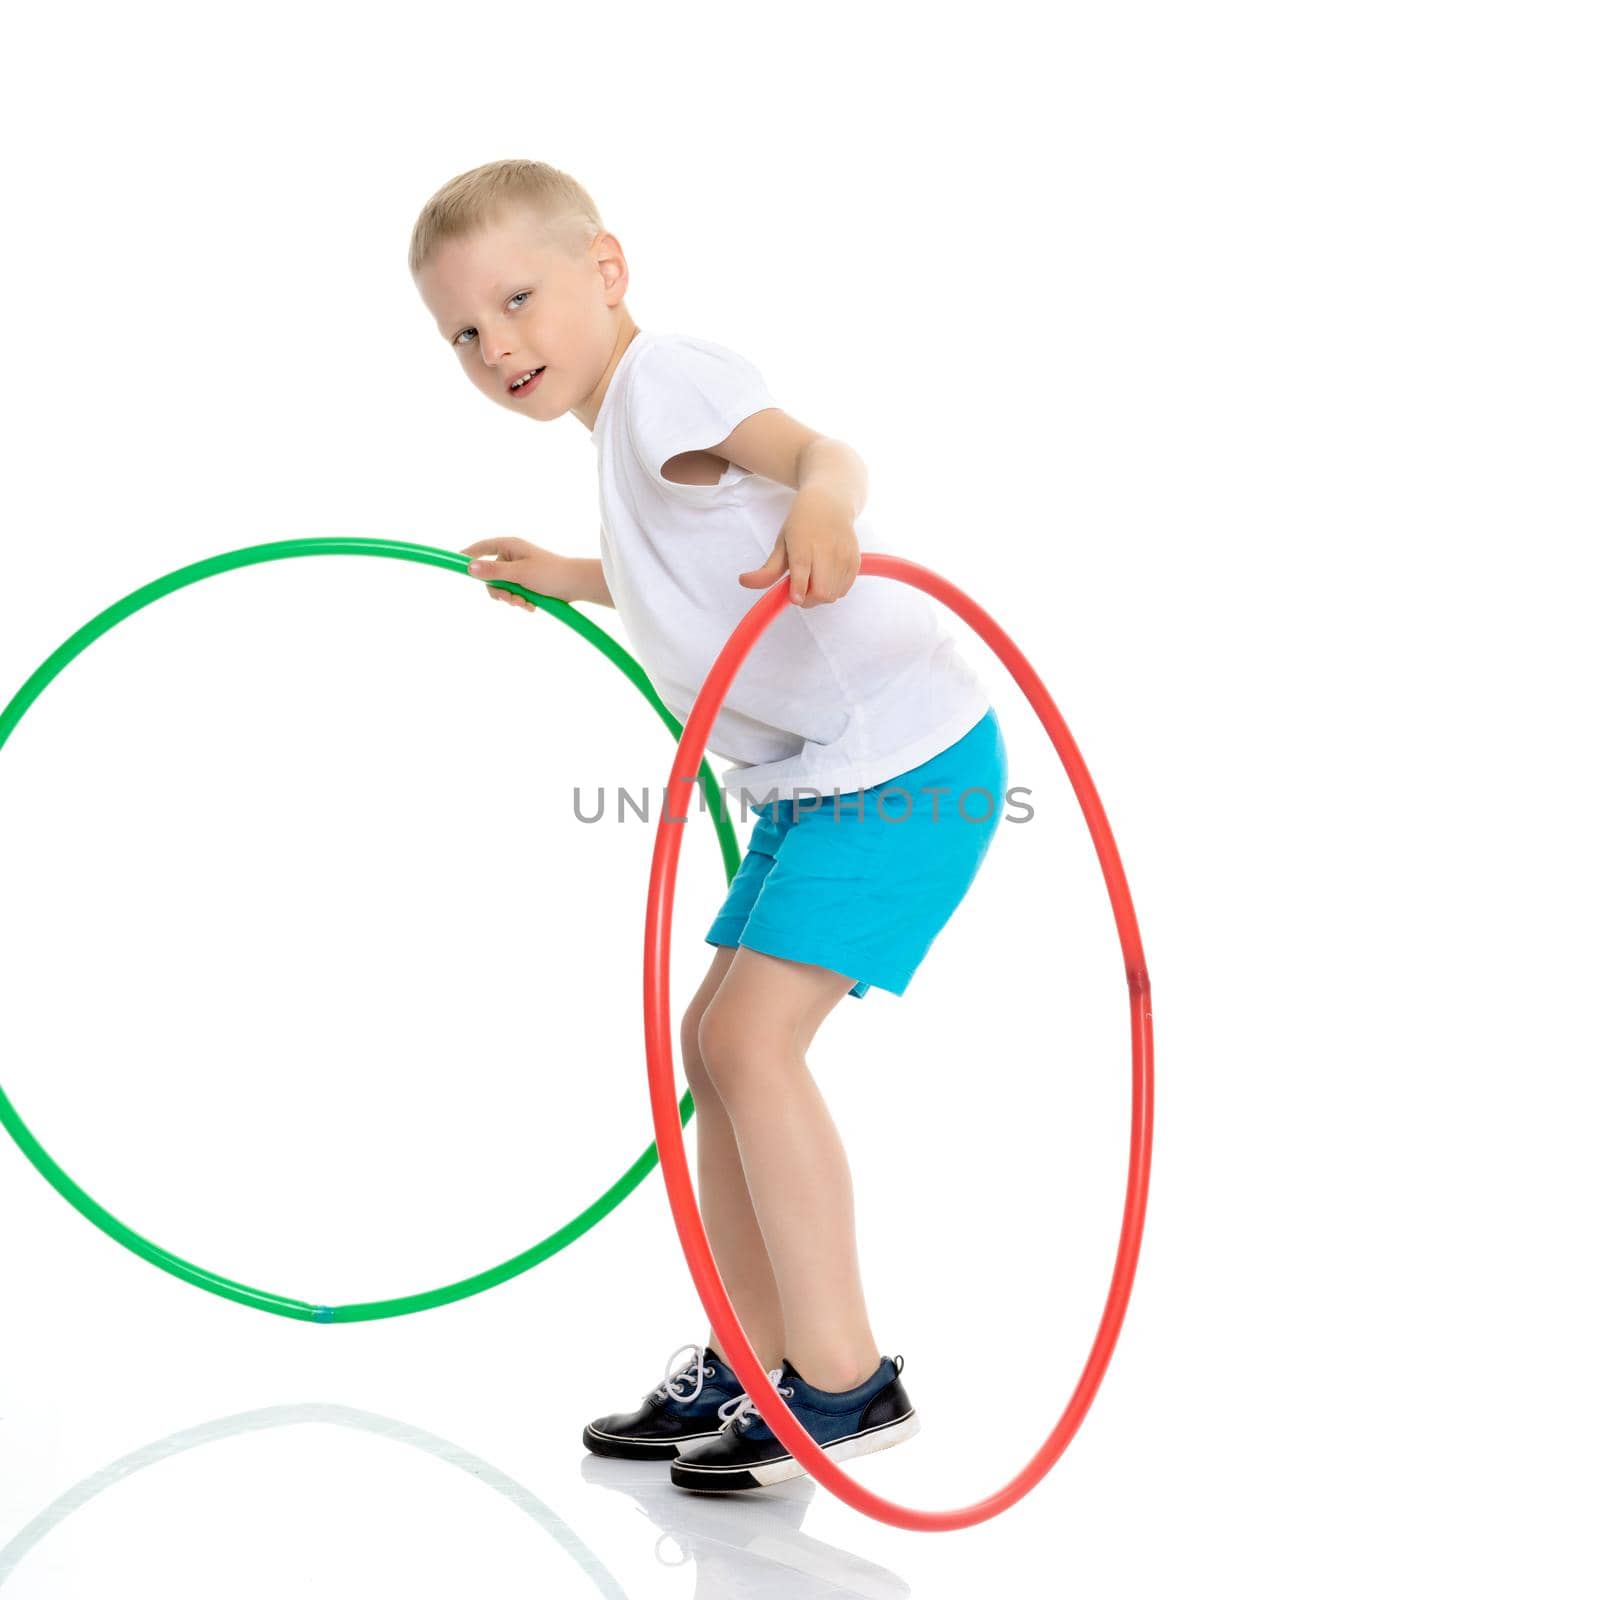 Cute little boy playing with a hoop. Concepts of fitness, children's sports. Isolated on white background.